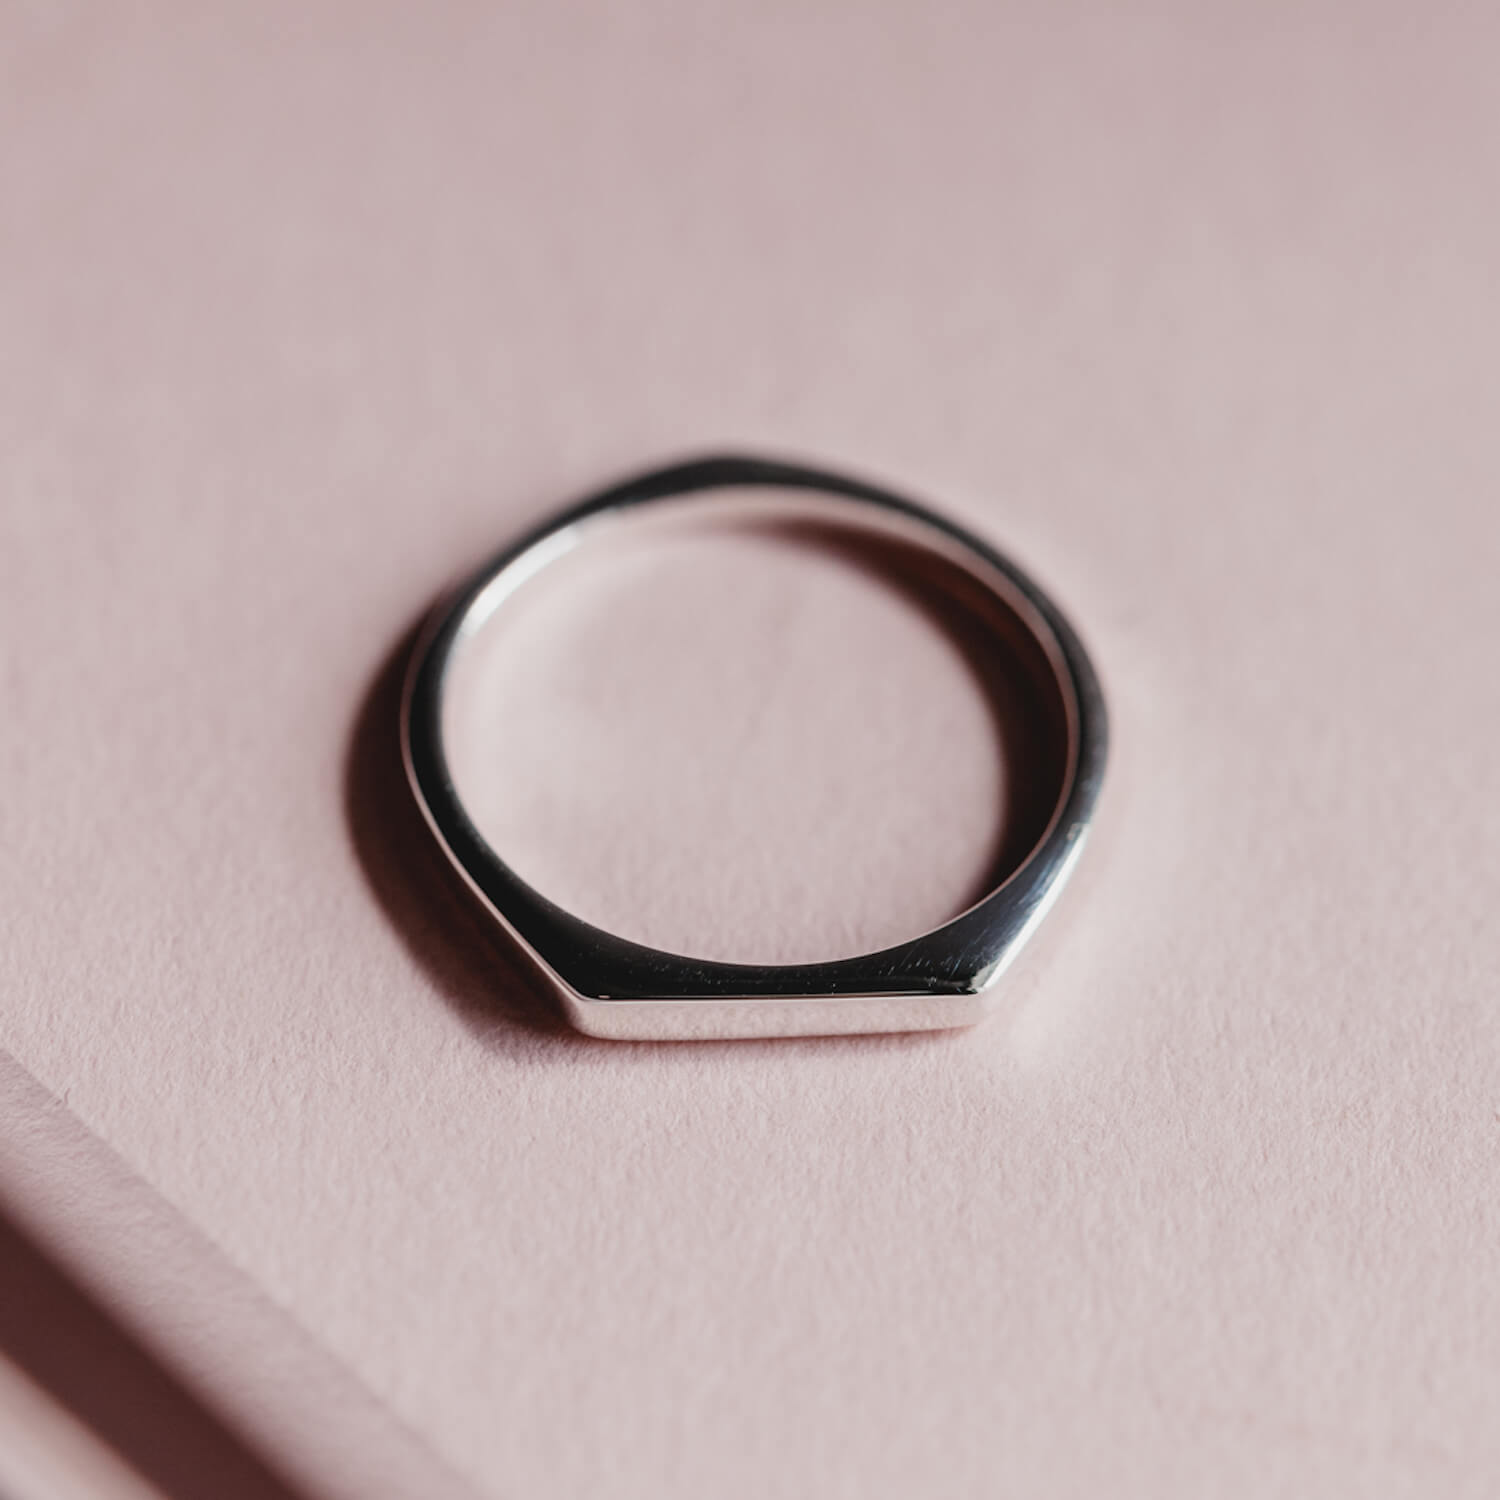 A thin silver signet style ring with a point on the bottom edge